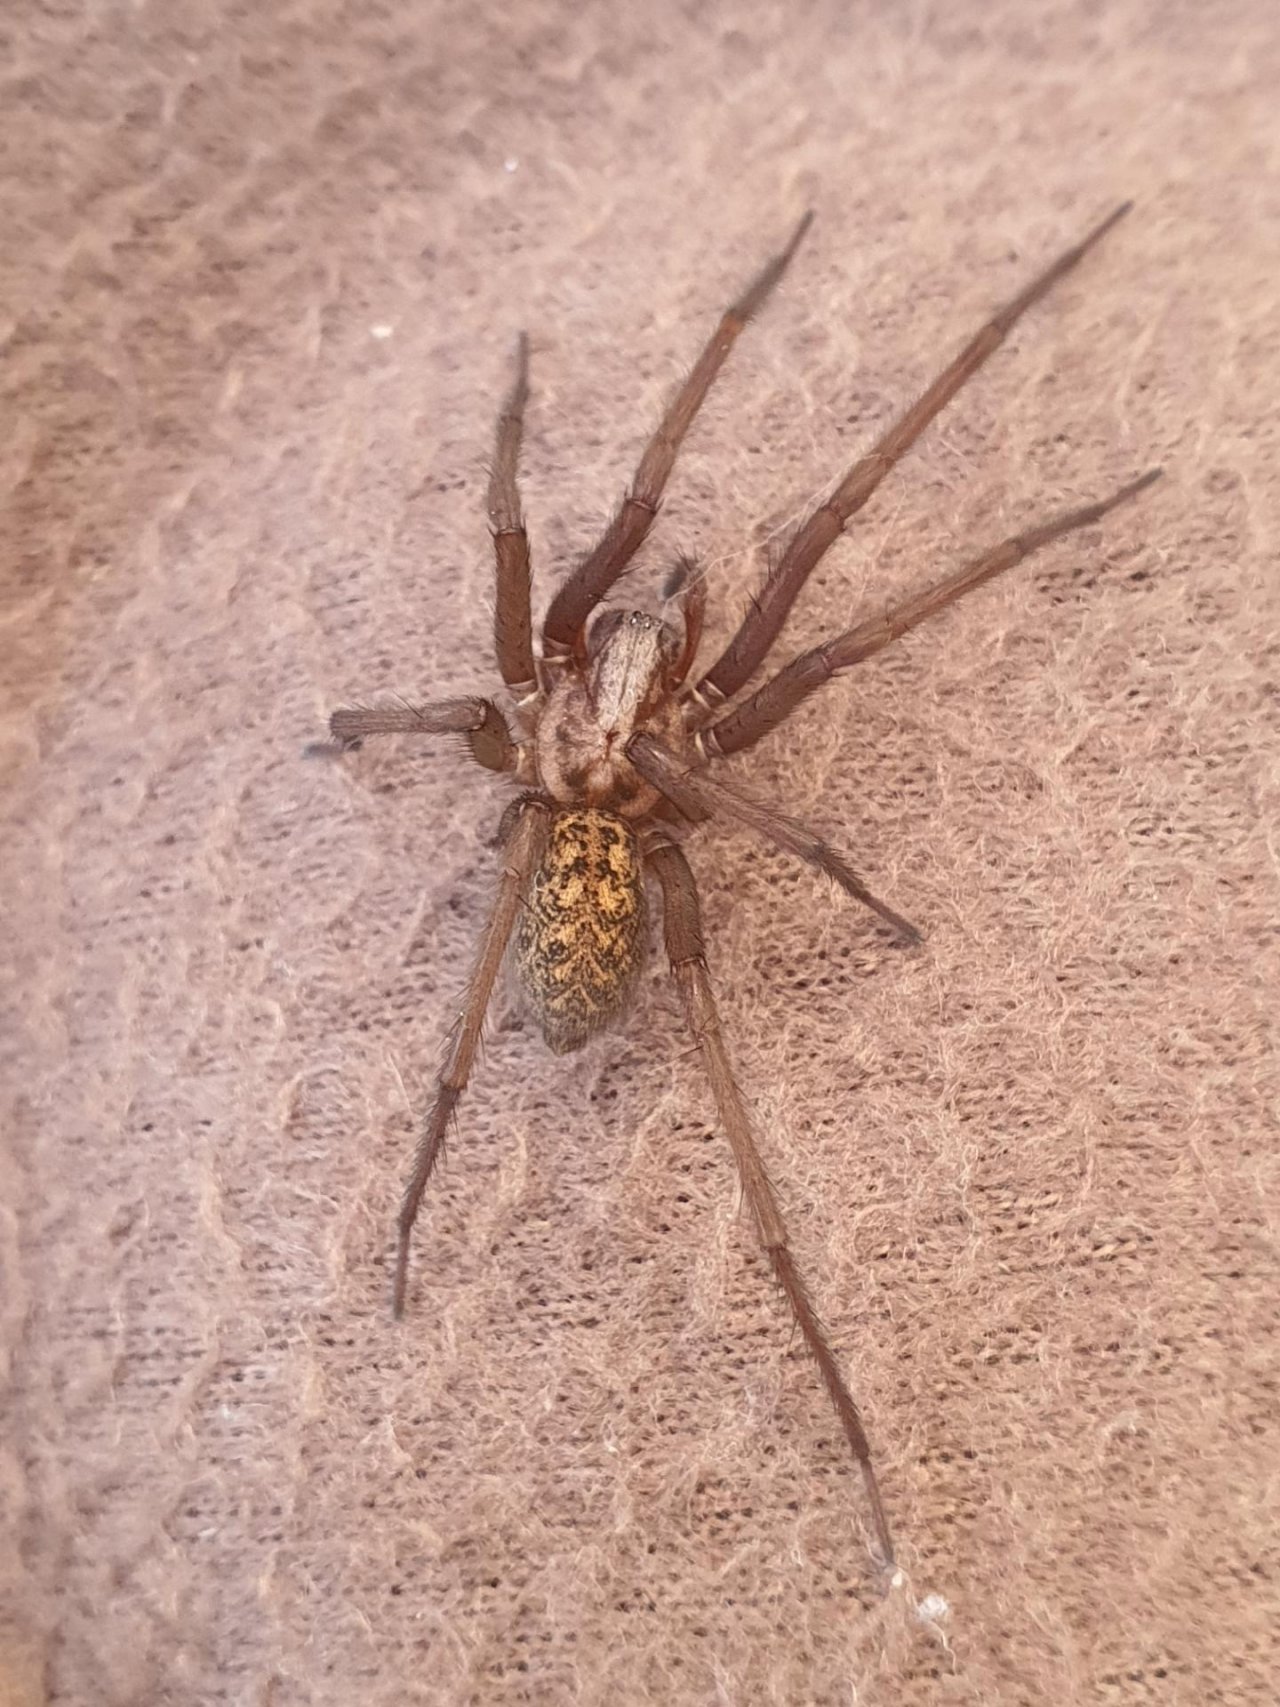 Giant Housespider in SpiderSpotter App spotted by Paul Vernelen on 26.12.2020